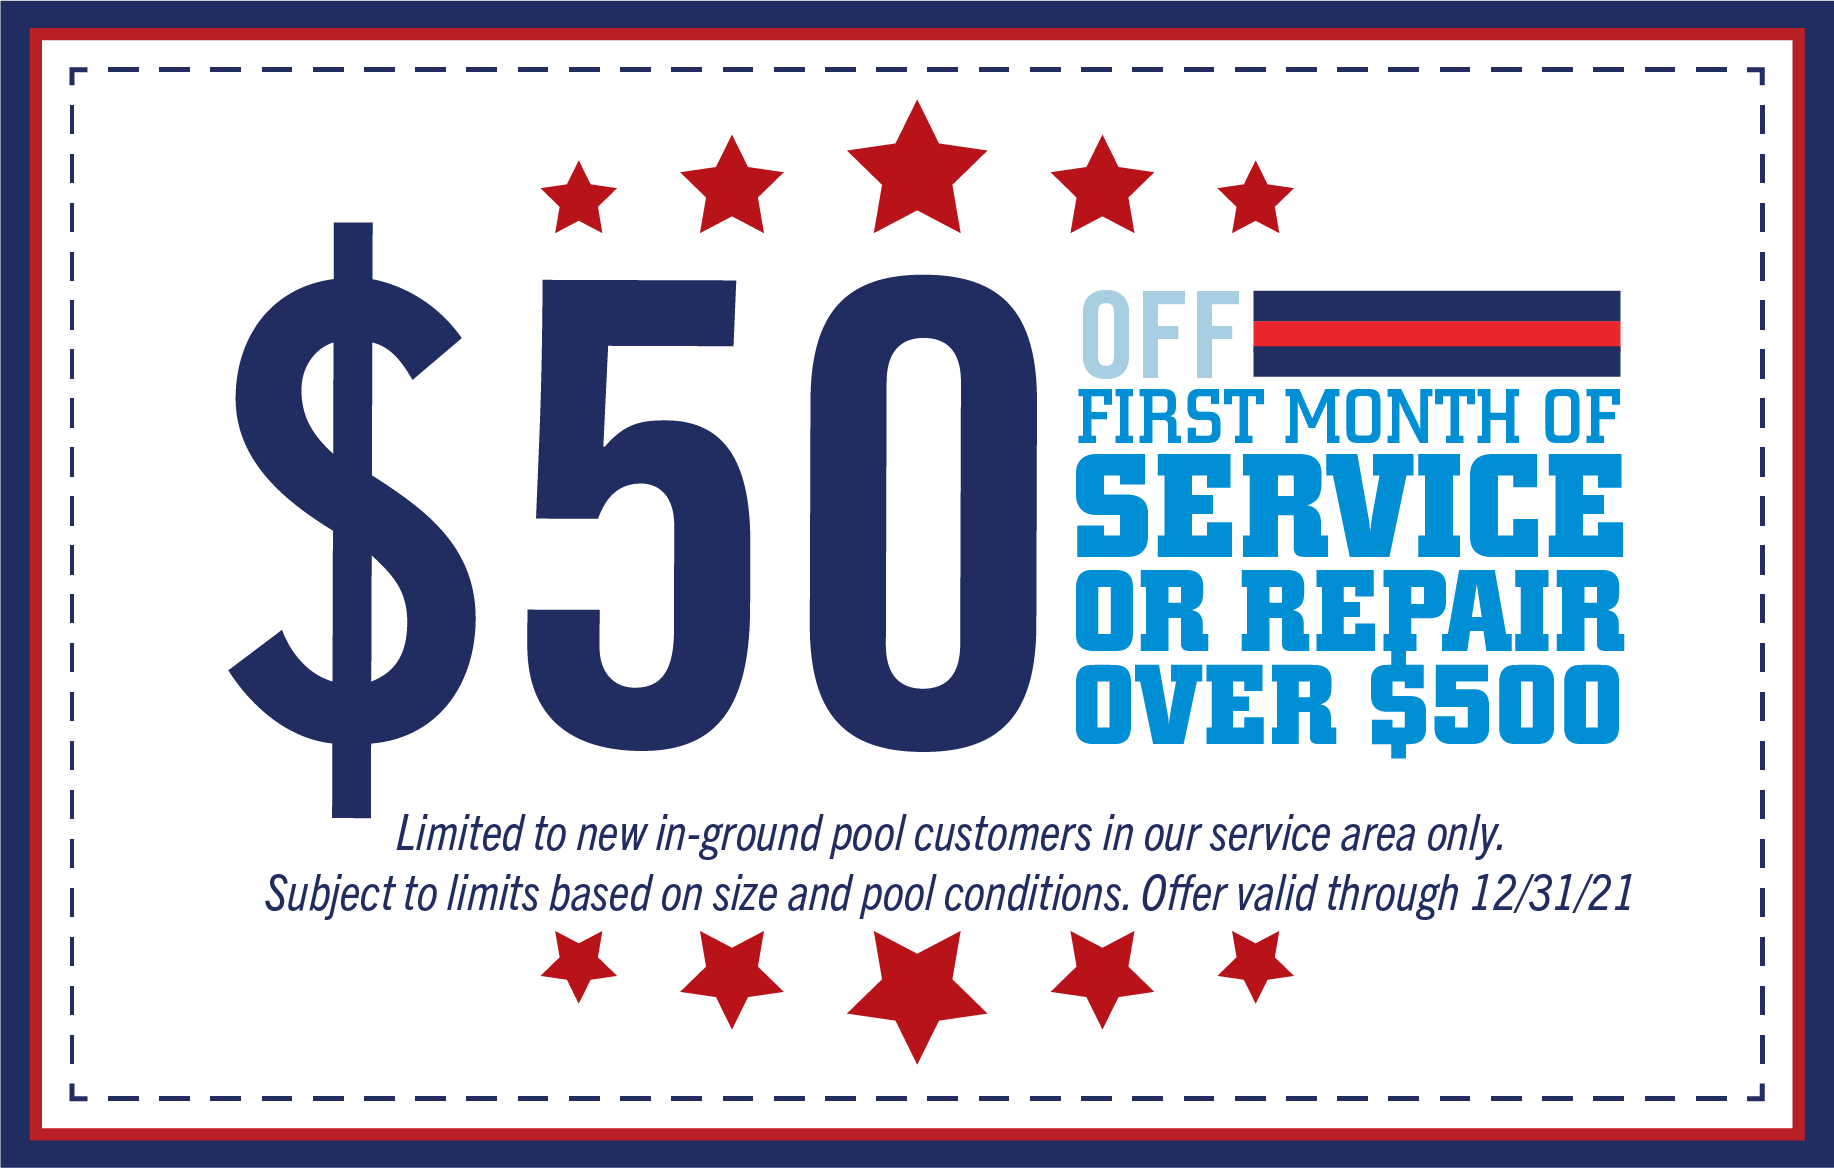 Coupon highlighting $50 off first month of service or repair over $500